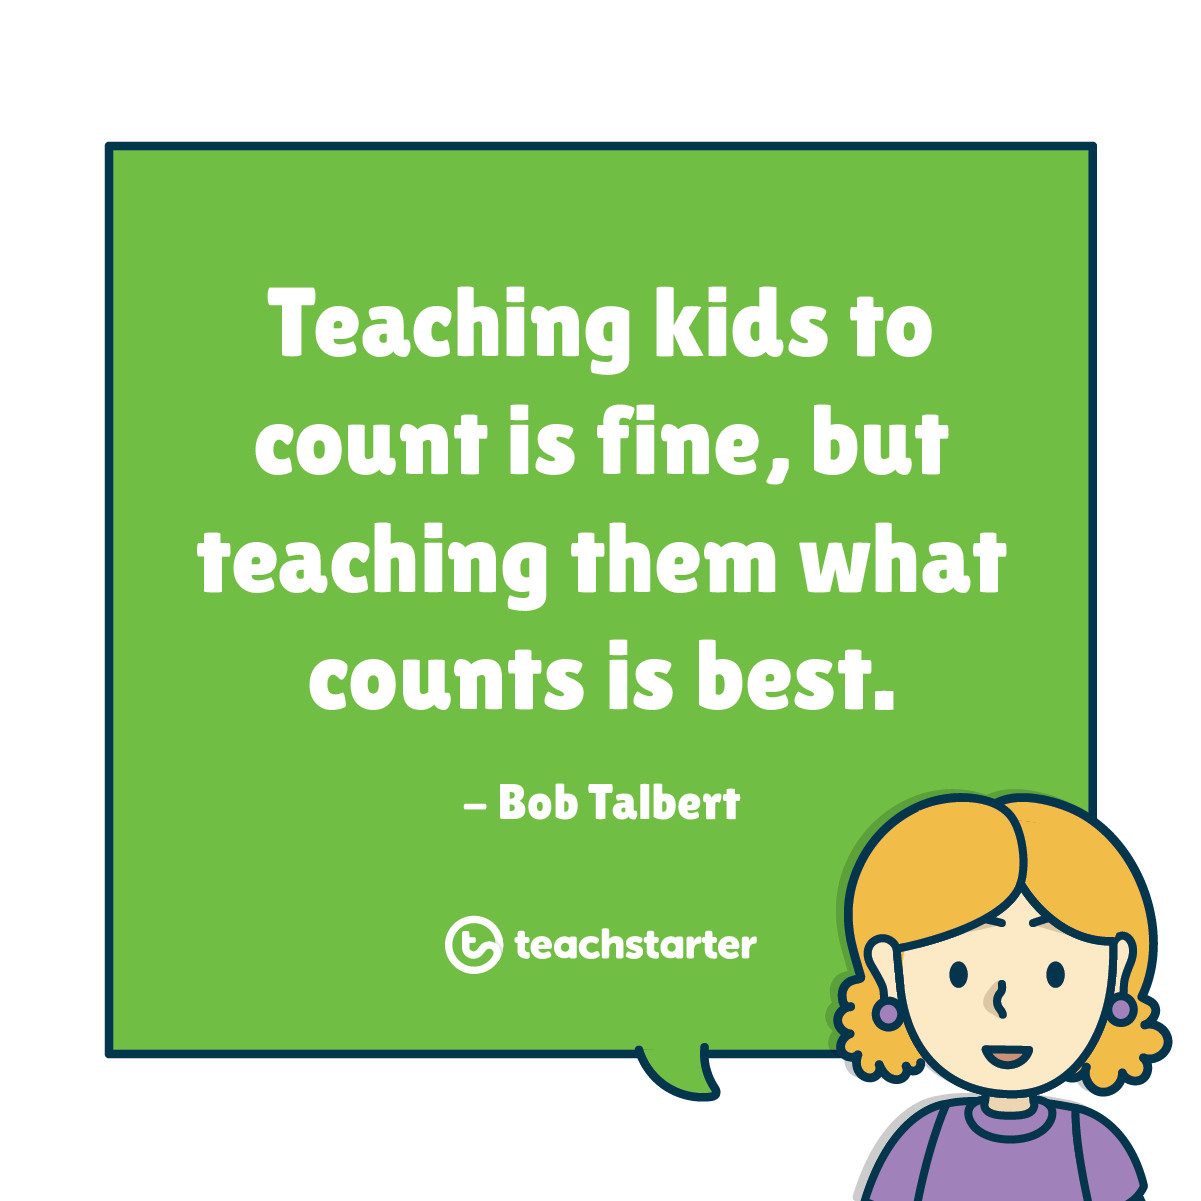 Kids Learning Quotes
 10 Inspirational Quotes for Teachers